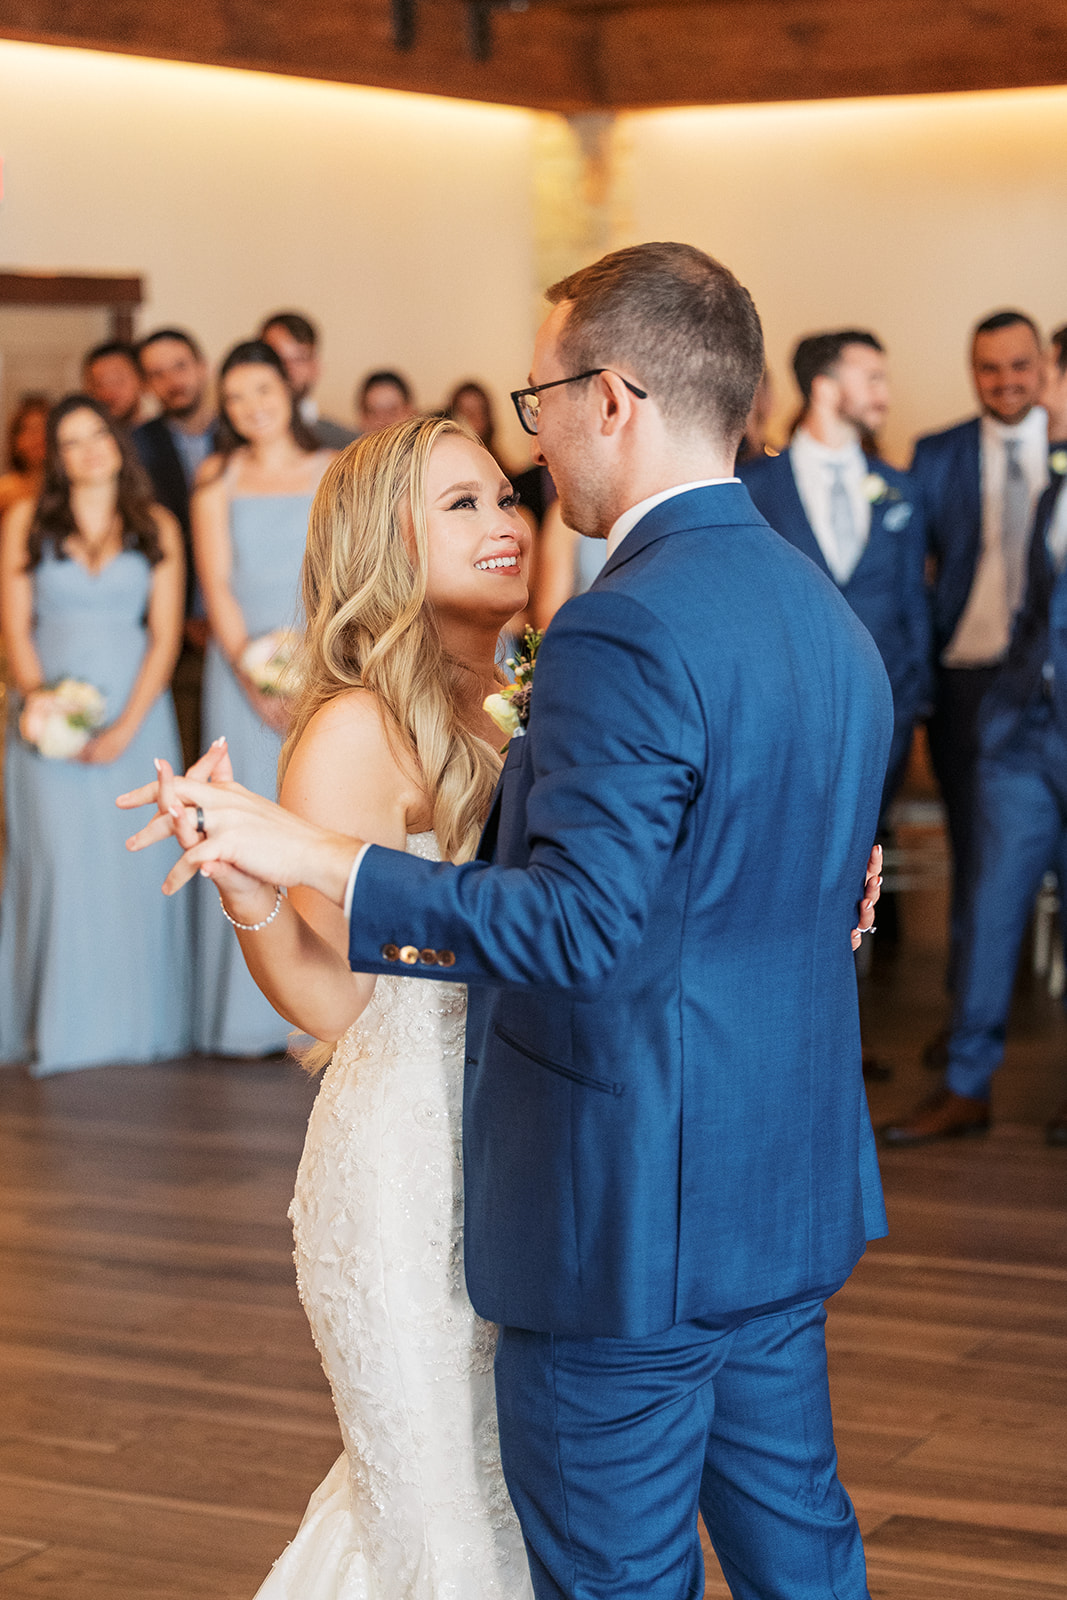 Newlyweds dance for the first time at their wedding reception